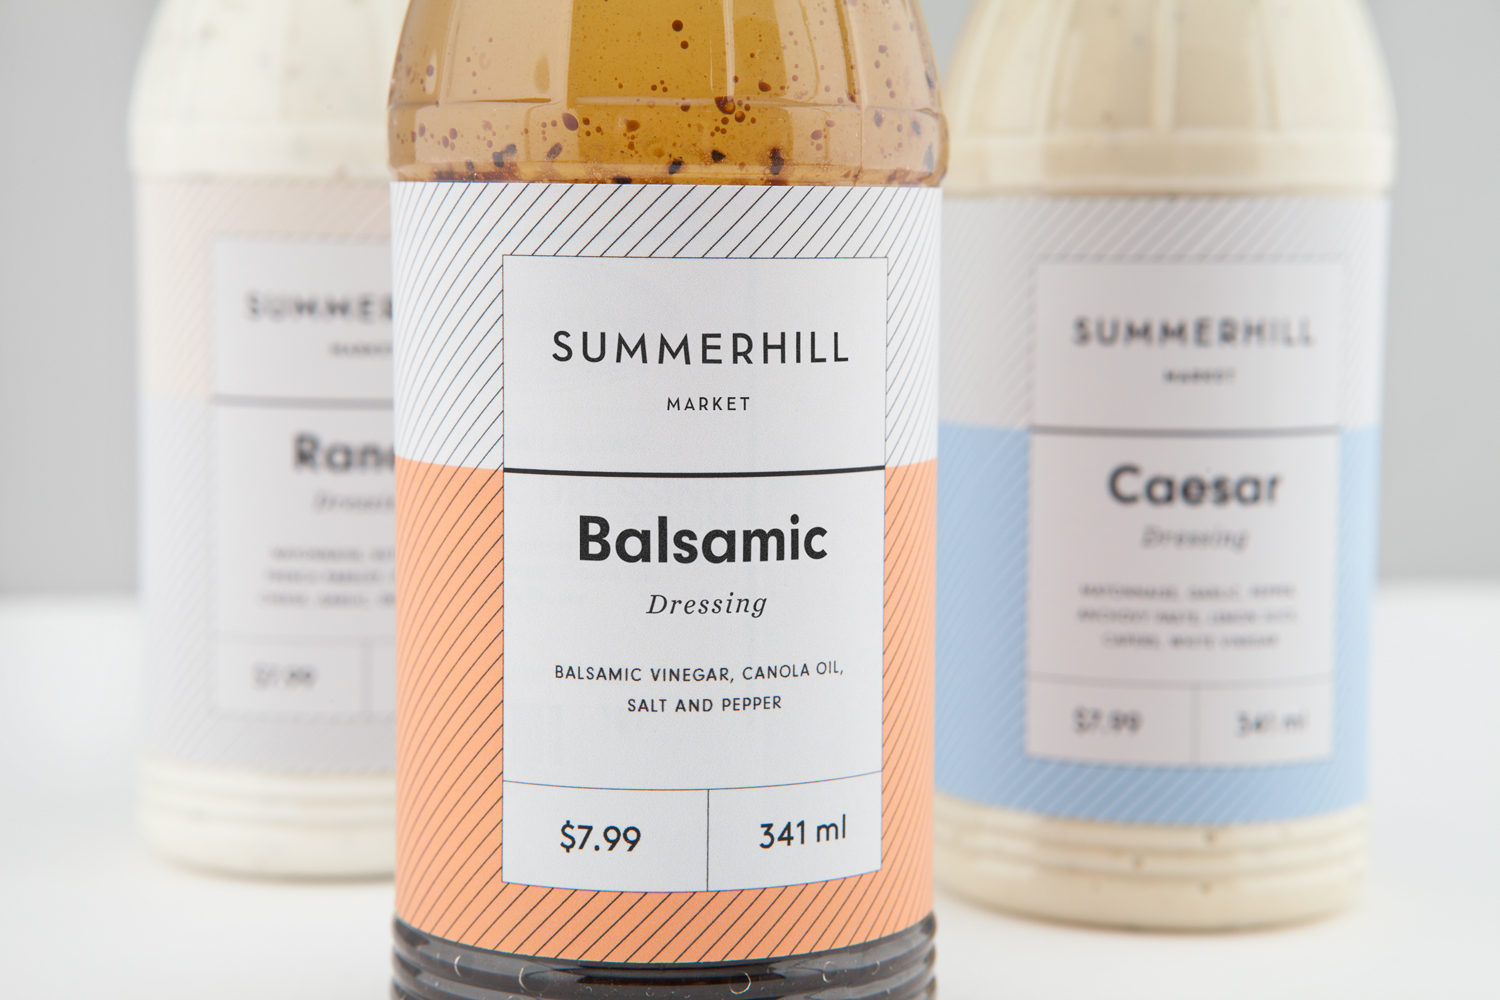 Branding and salad dressing packaging designed by Canadian studio Blok for Toronto based boutique grocery store Summerhill Market